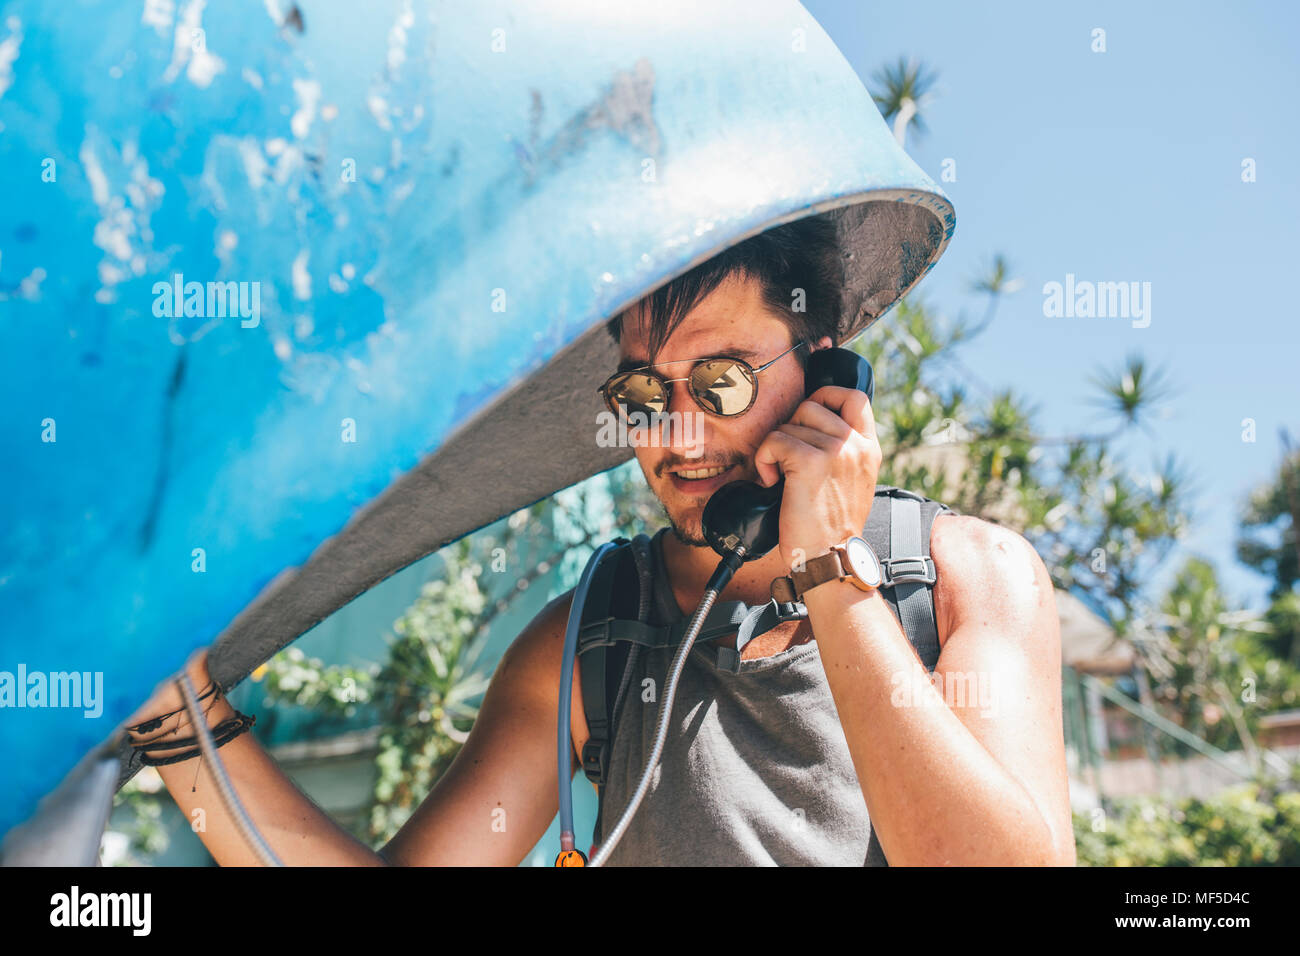 Cuba, Young man amking a call from a telephone booth Stock Photo